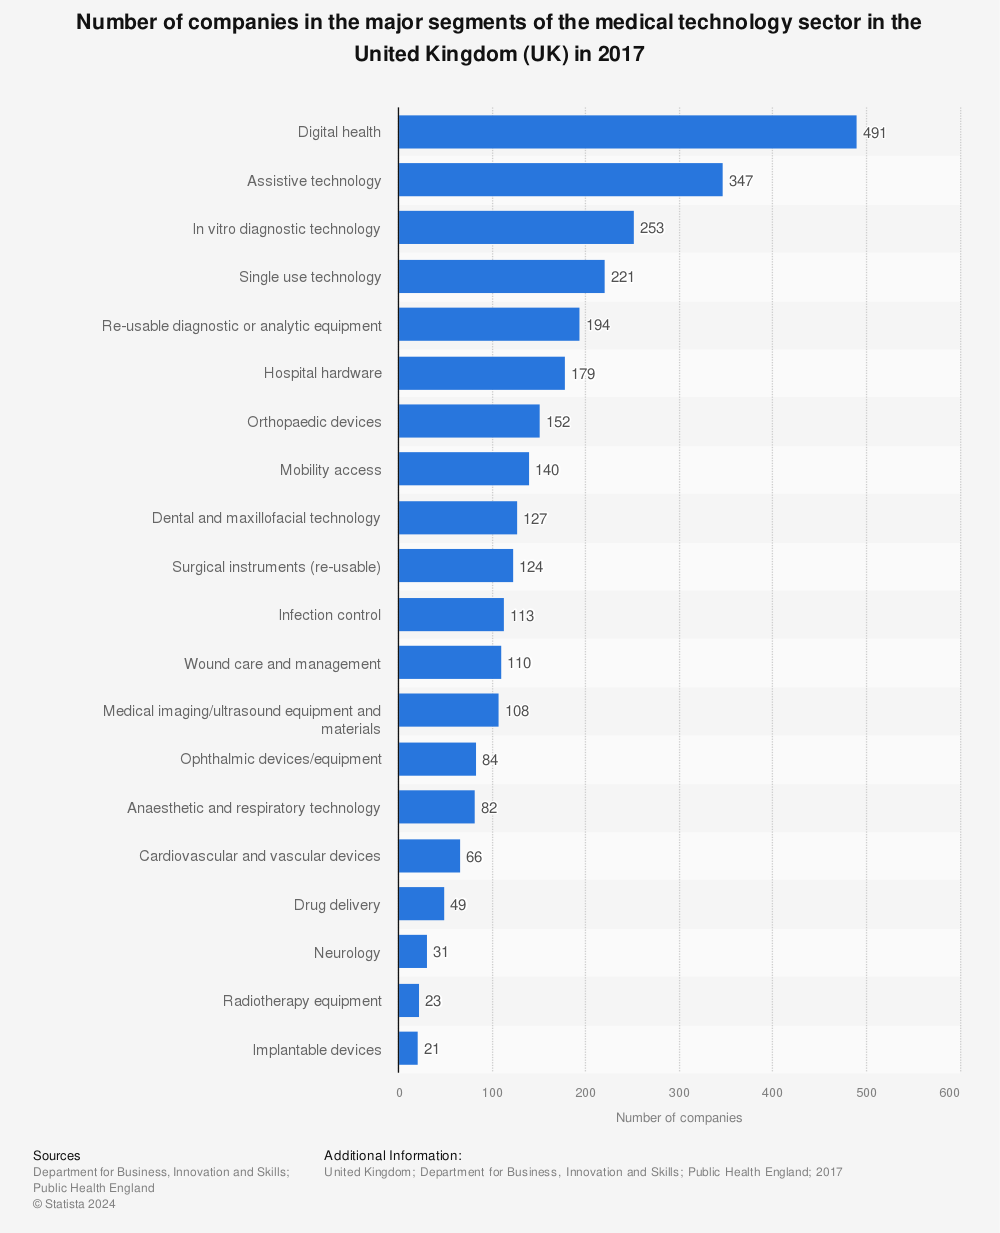 Statistic: Number of companies in the major segments of the medical technology sector in the United Kingdom (UK) in 2017 | Statista